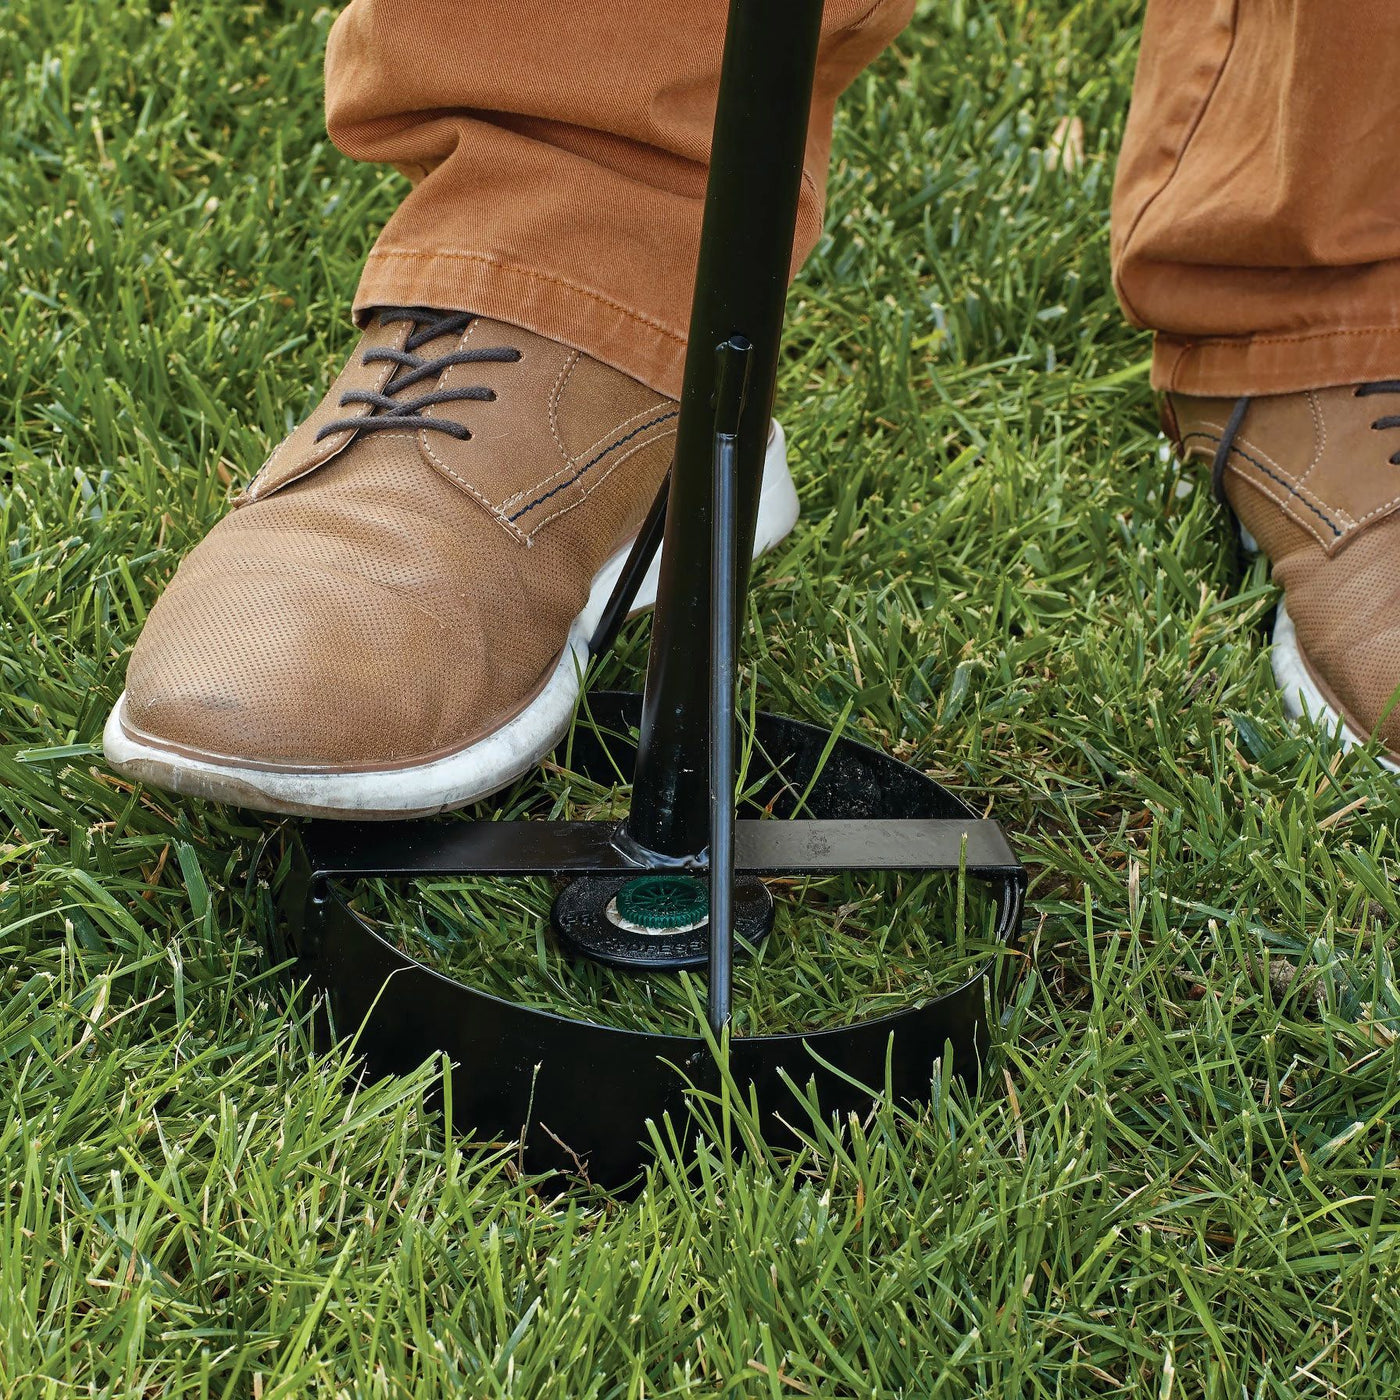 Seven inch sprinkler donut sod cutter. Being used to cut sod from the outer edges of a sprinkler head in the grass. 